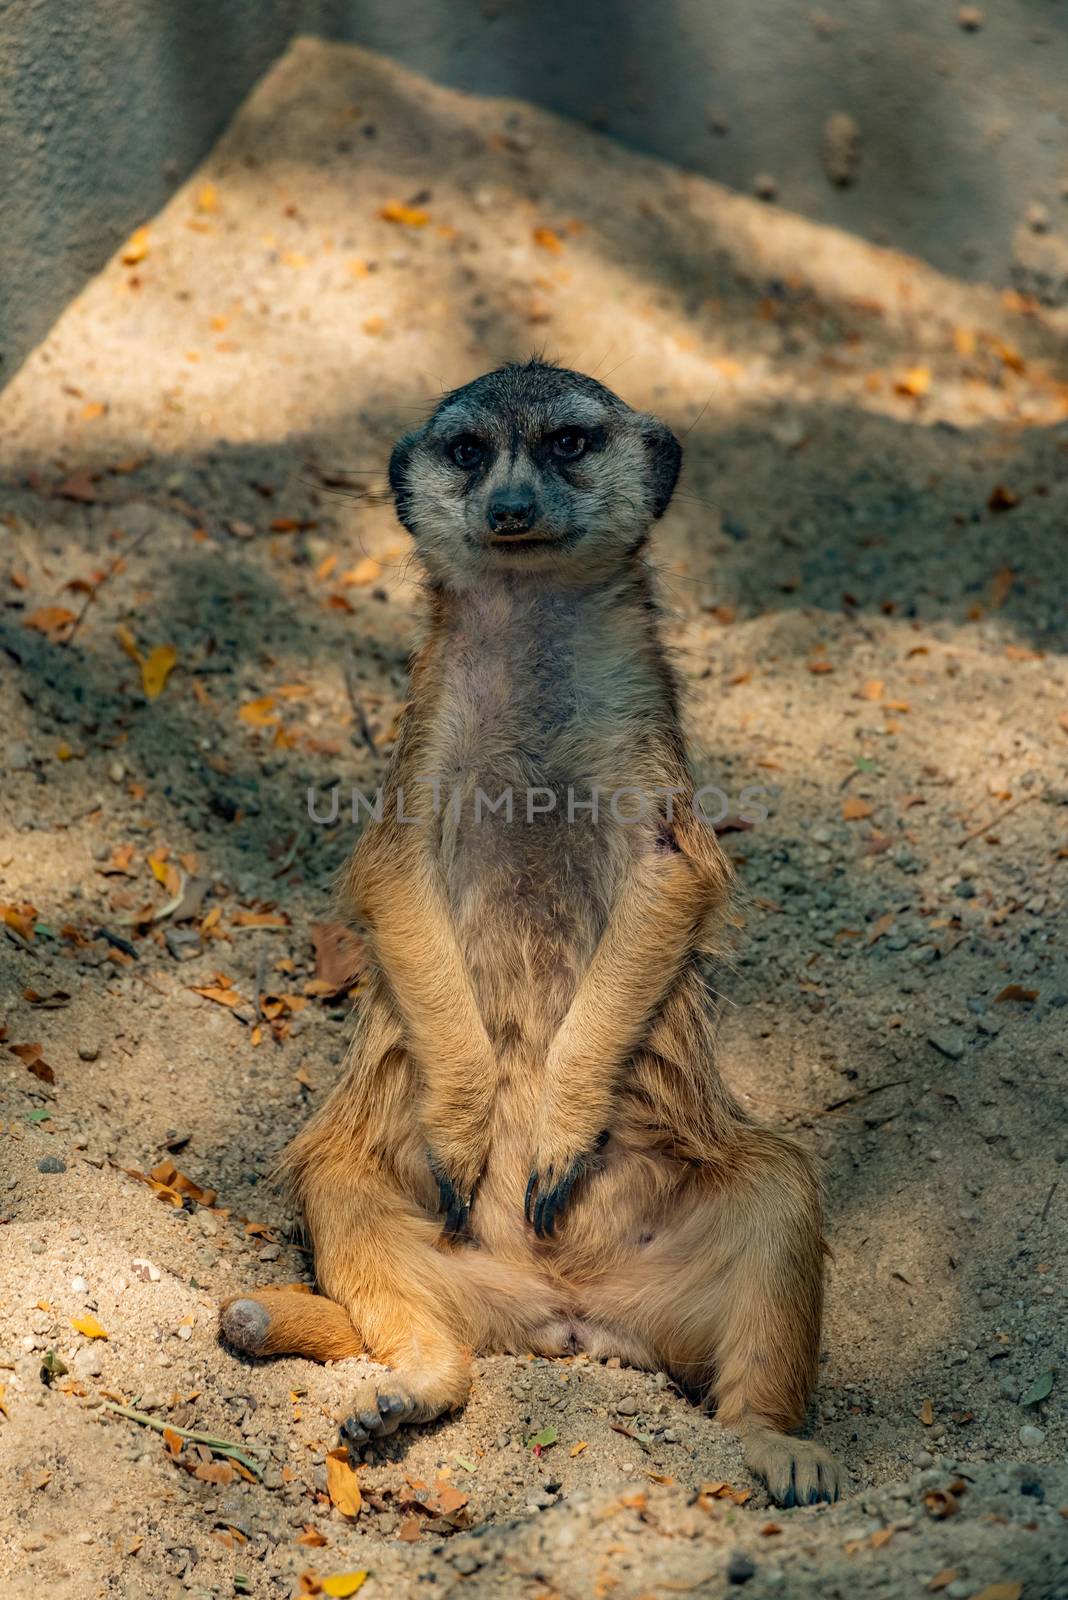 A meerkat resting on some sand.